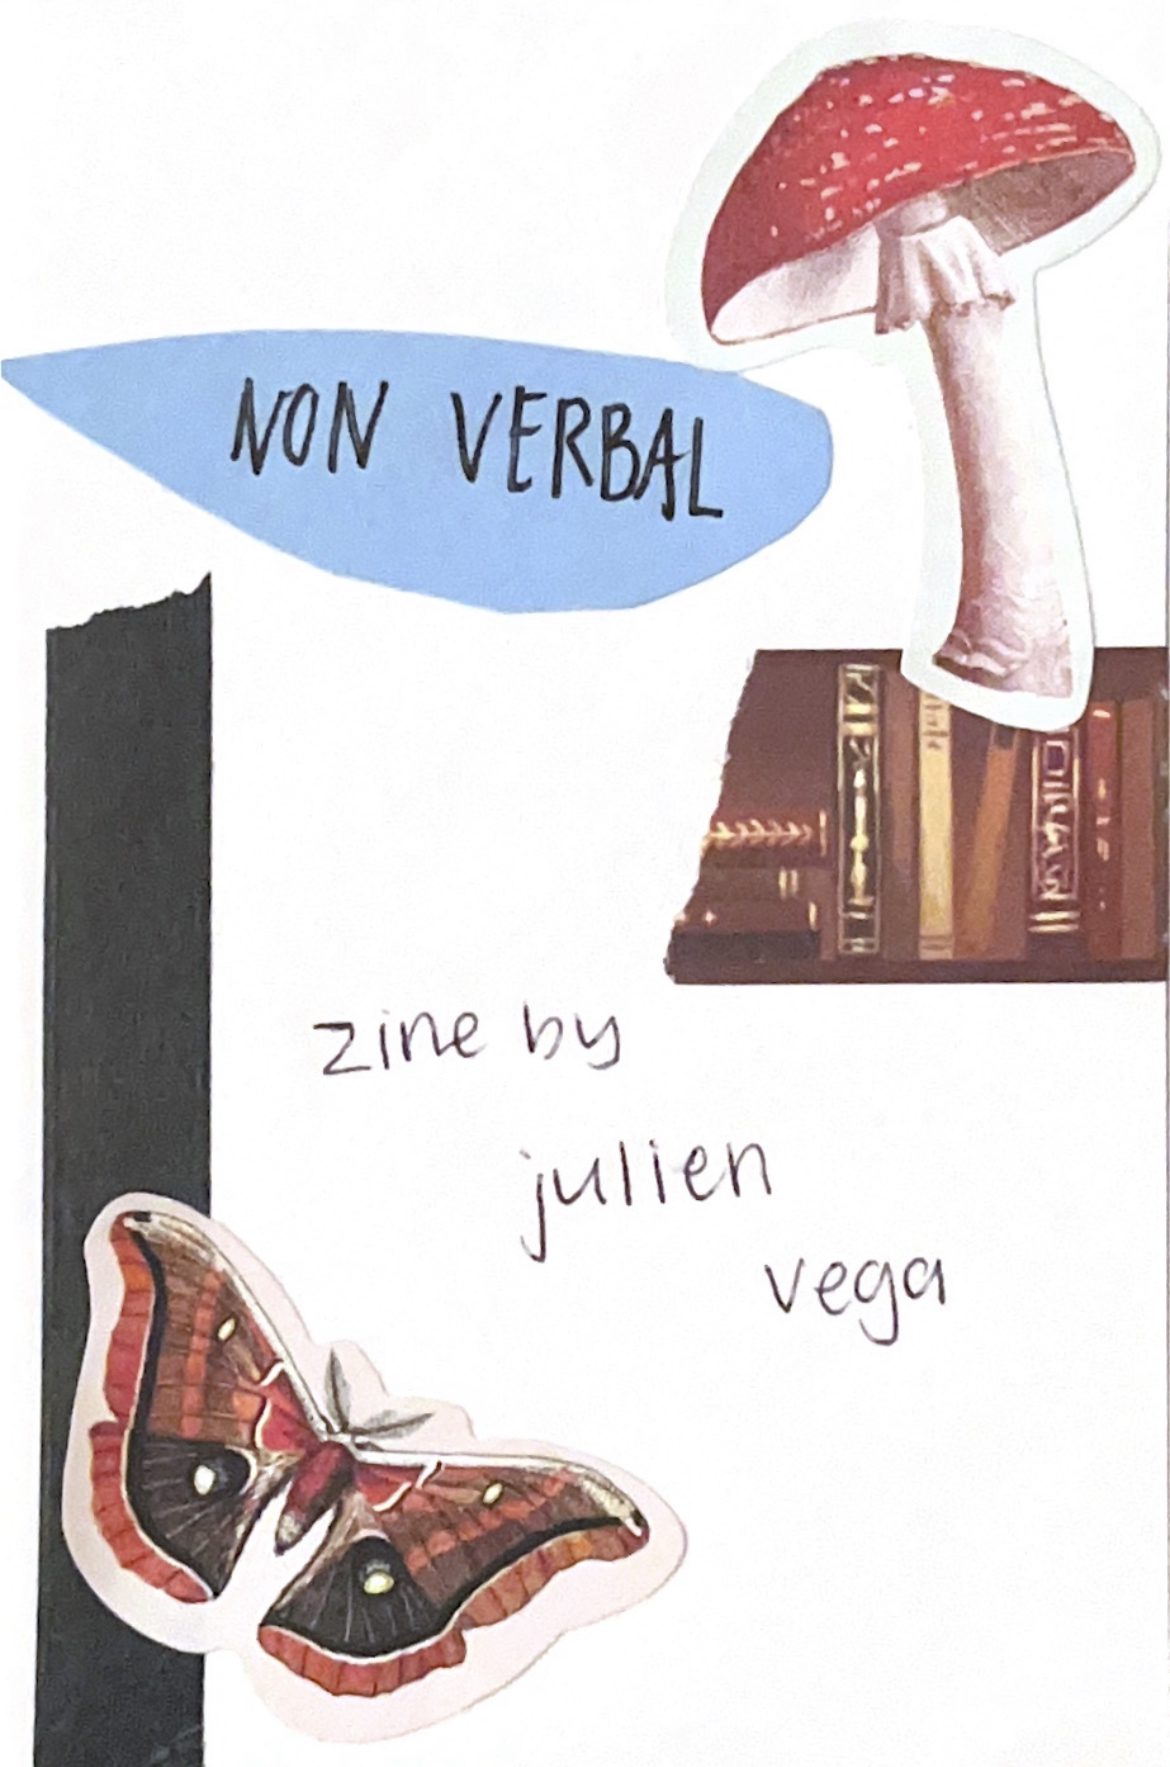 Cover of Zine. The background is white. On the upper left hand side, there is a blue speech bubble that says "Non-Verbal" in all caps. Next to it, is a strip of washi tape that has books. On top of the tape is a large red mushroom sticker. On the bottom left side of the zine is a long strip of black washi tape. On top of the washi tape is a colorful brown moth. Above the moth is written "Zine by Julien Vega"